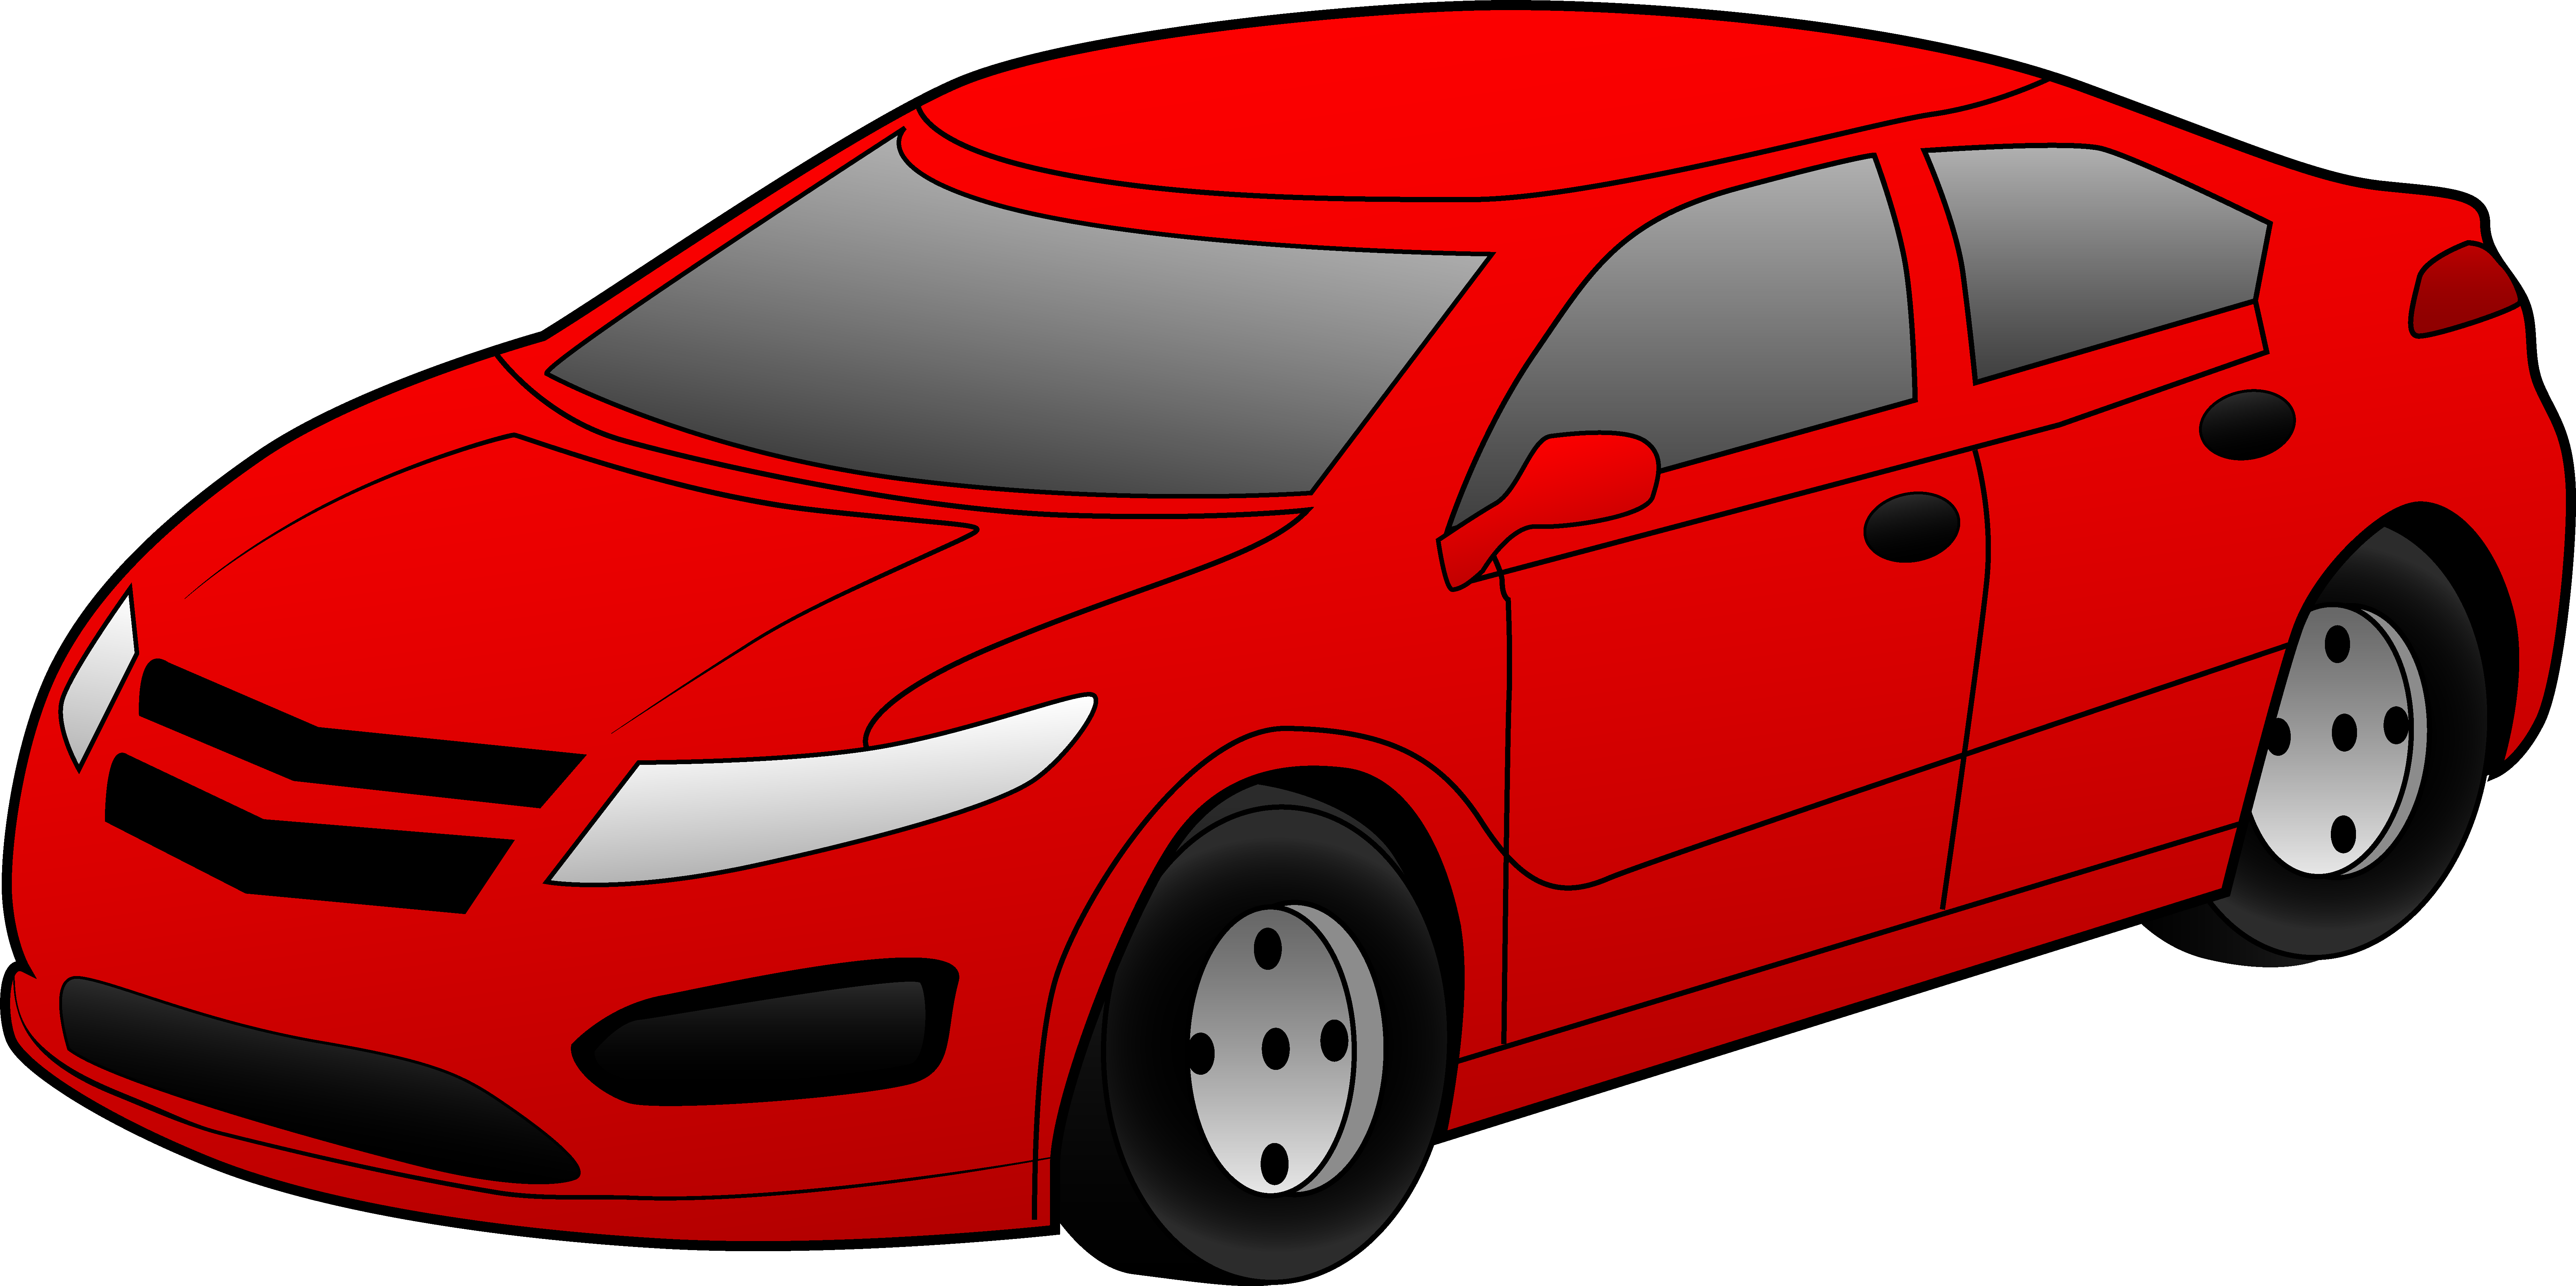 Car Clipart Top View | Clipart Panda - Free Clipart Images